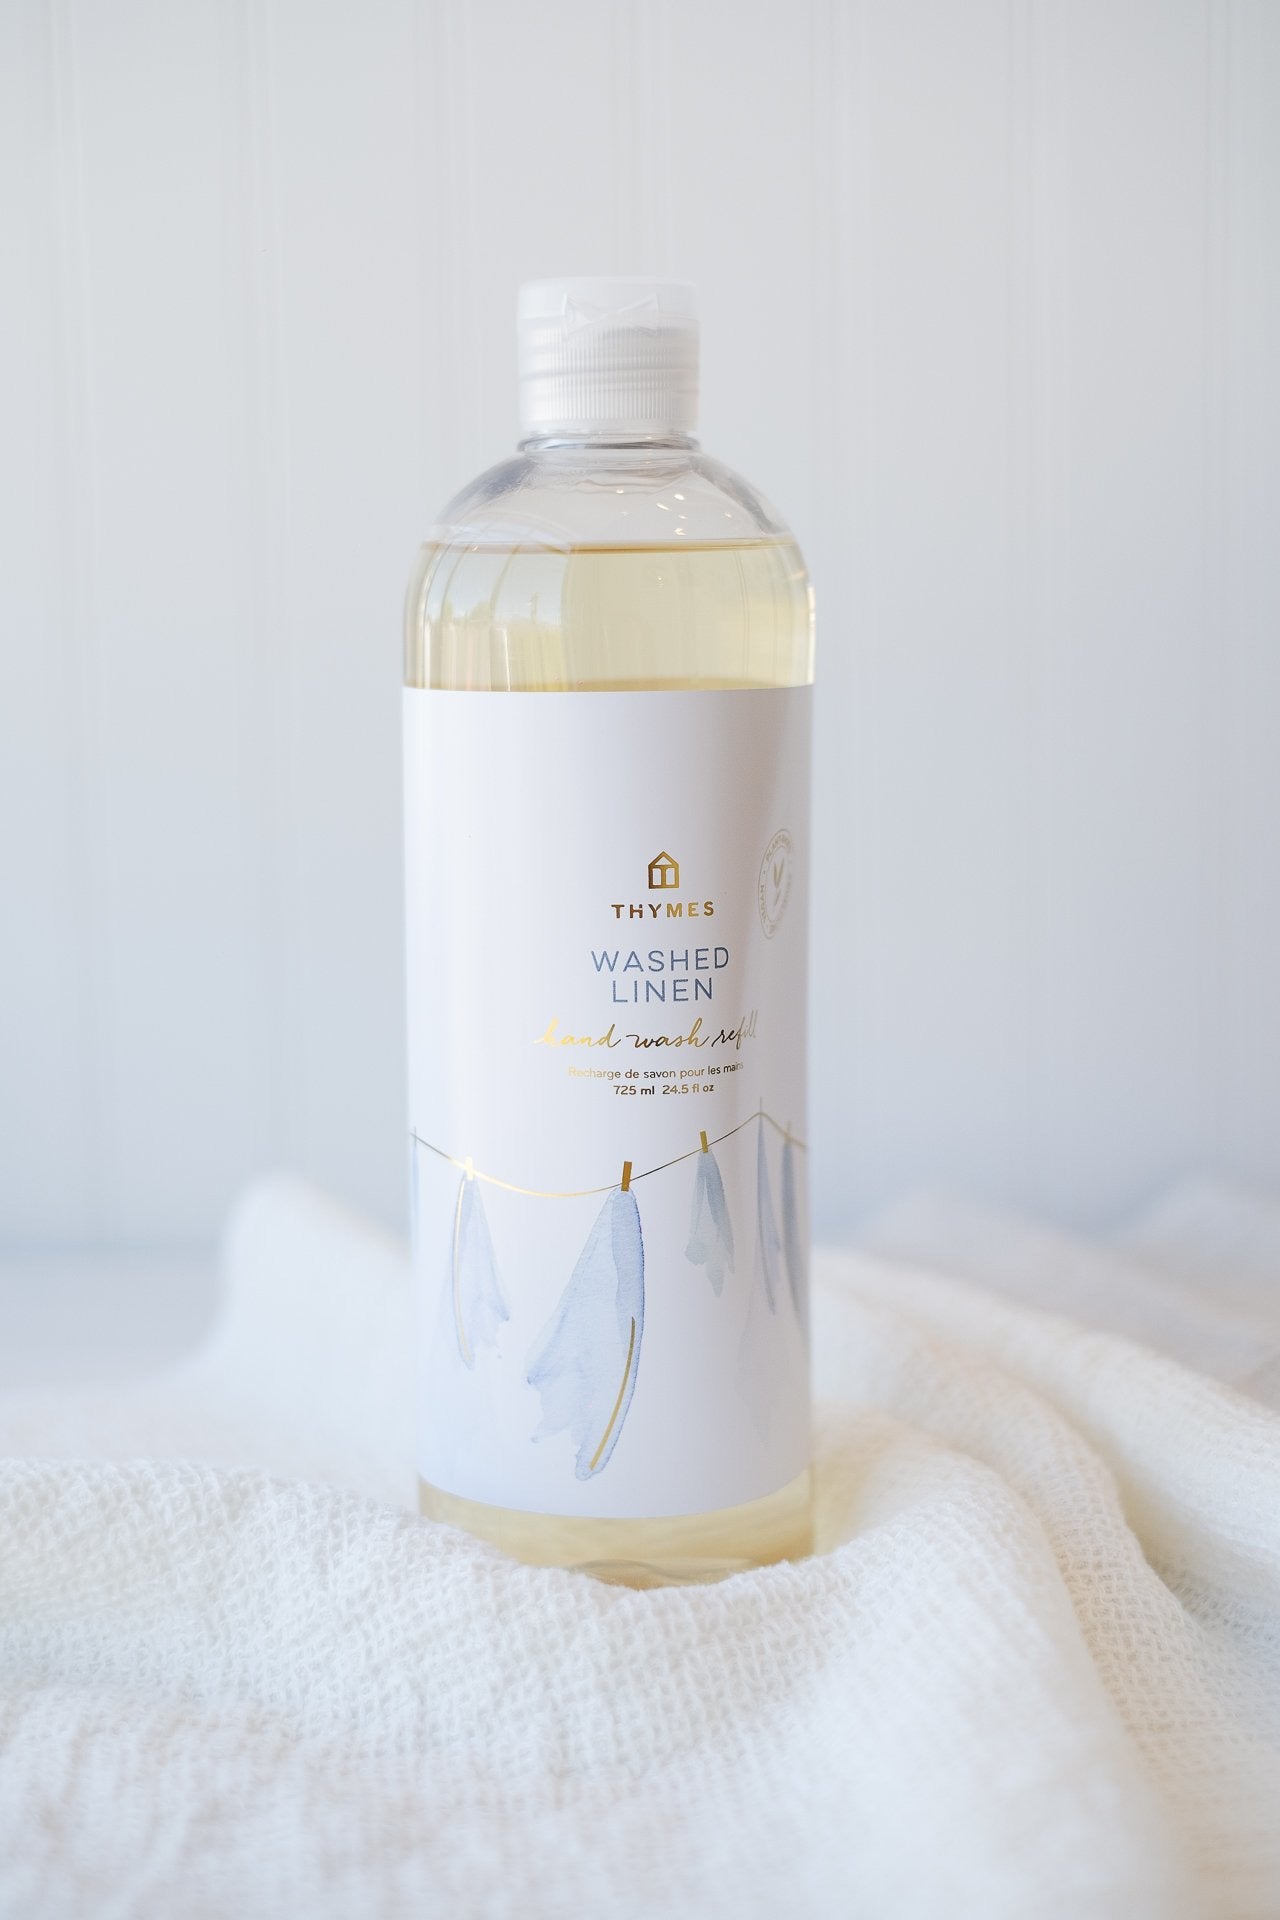 Thymes Washed Linen Hand Wash Refill